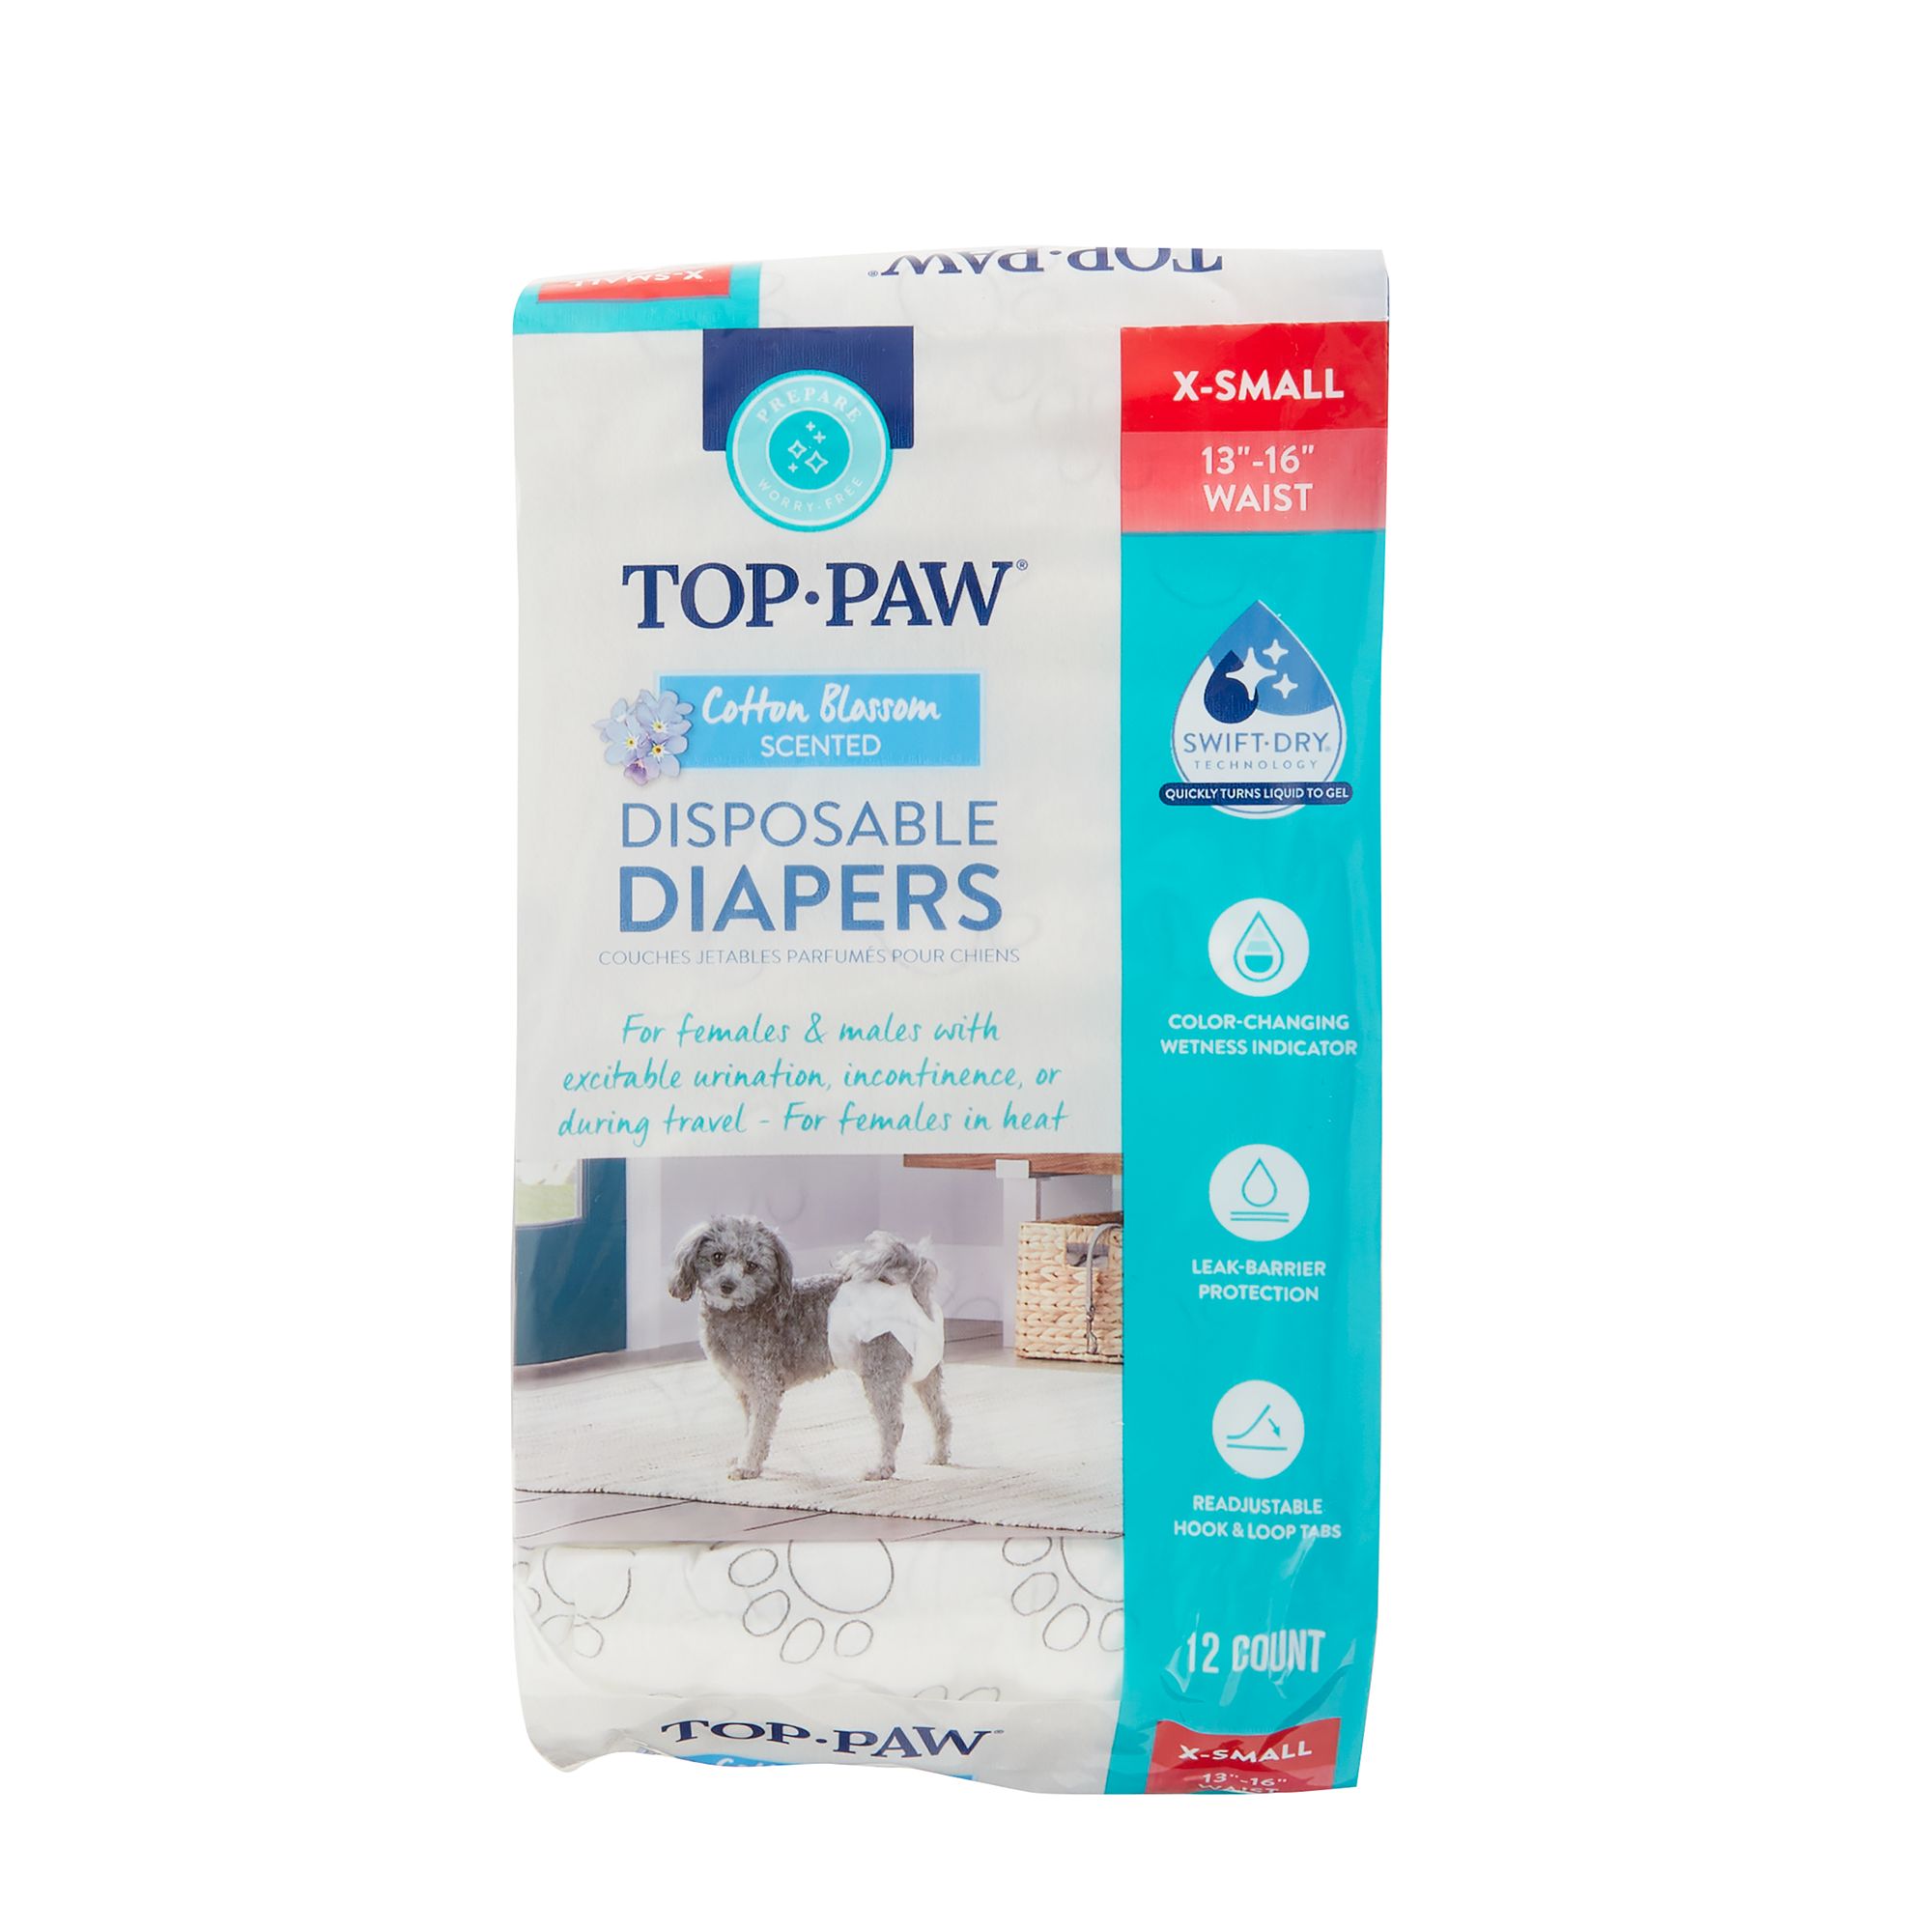 Top Paw XL Adhesive Dog Pads - 28 x 34, Size: 150 Count | PetSmart